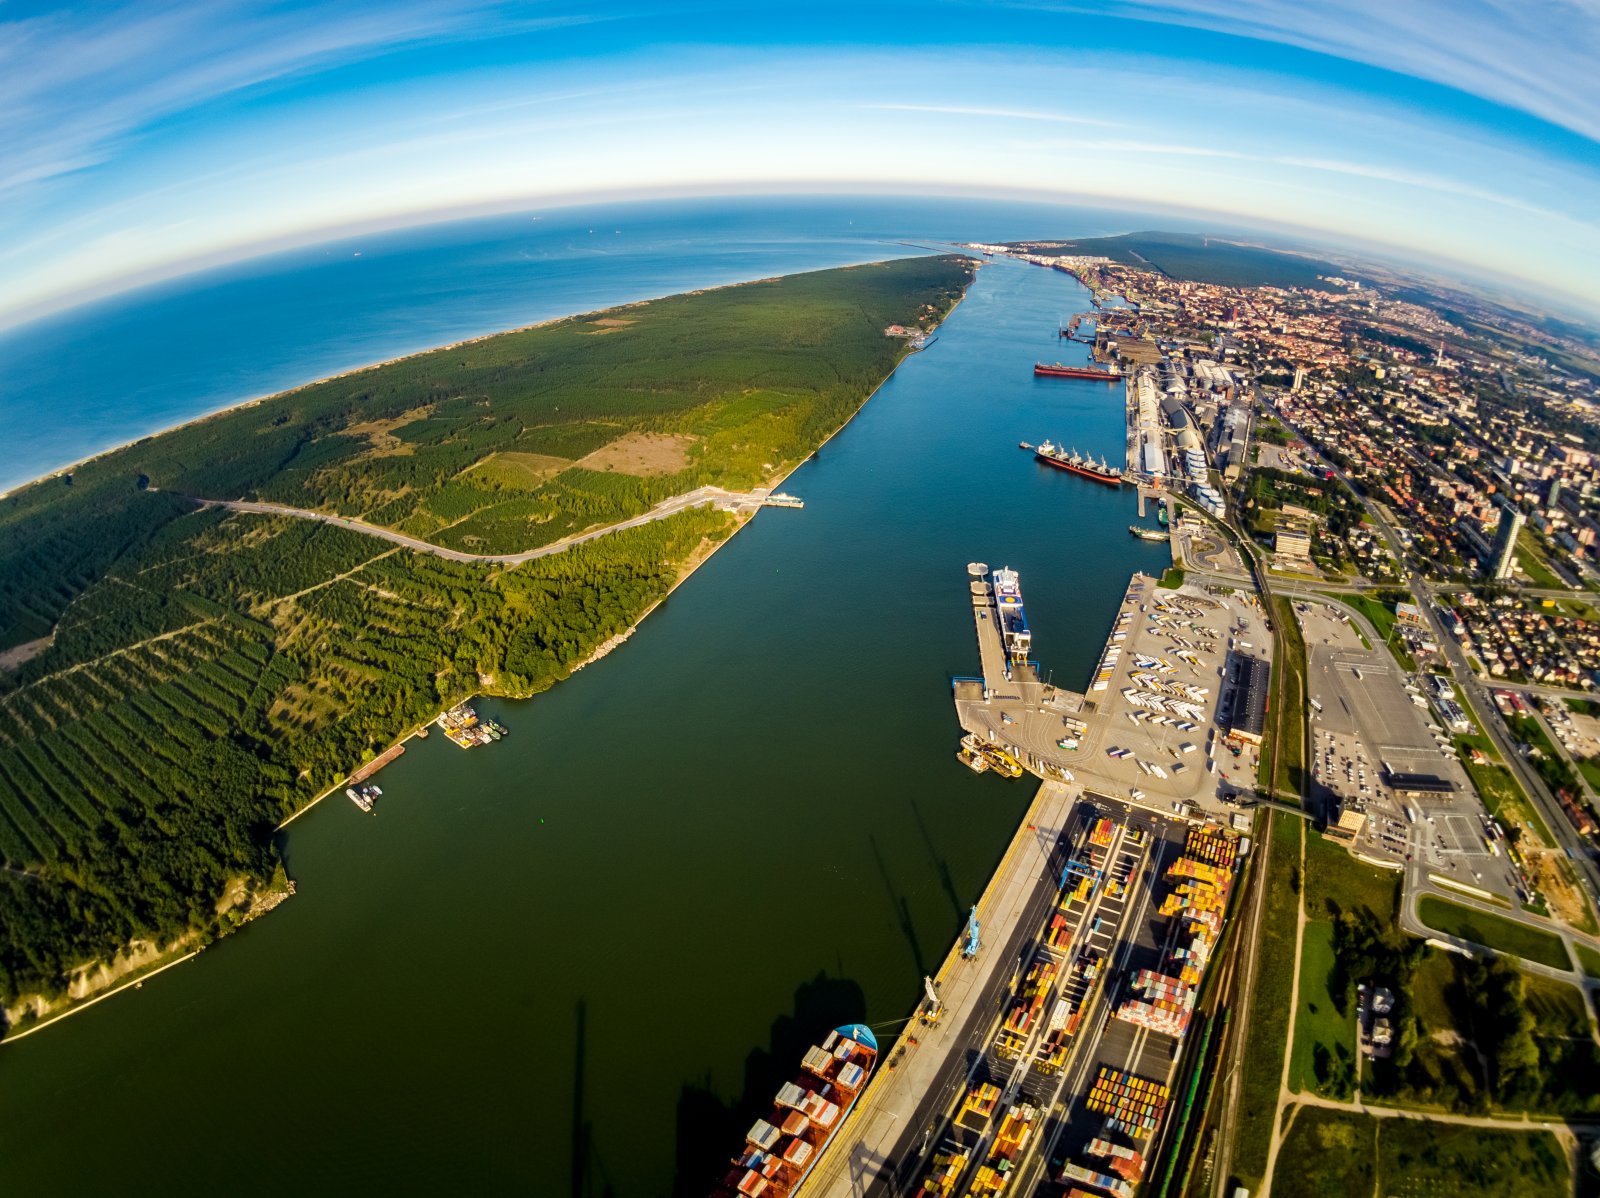 KN, LS, MOL to develop LCO2 and hydrogen project in Klaipeda